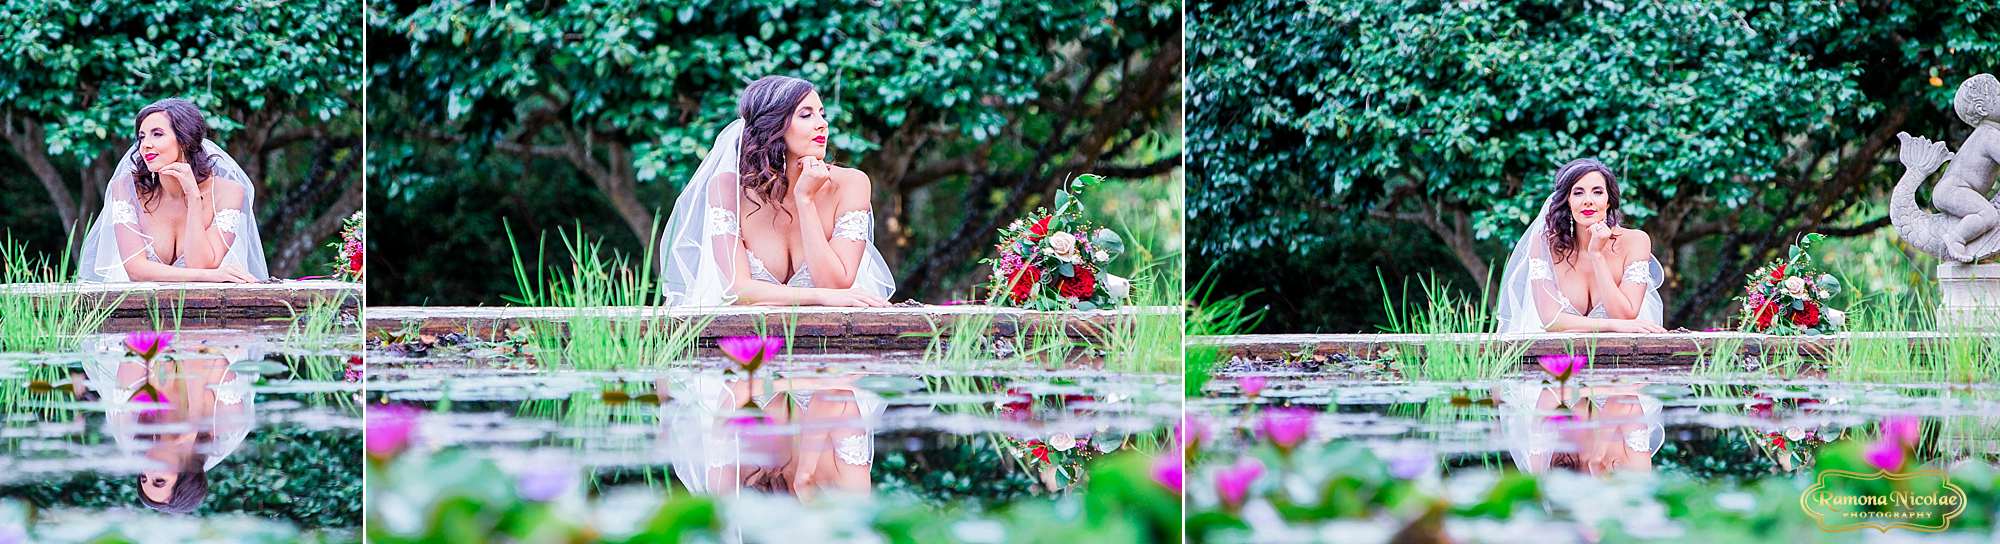 bride smiling surounded by flowers at brookgreen gardens for her bridal session with ramona nicolae photography in myrtle beach sc-4.jpg